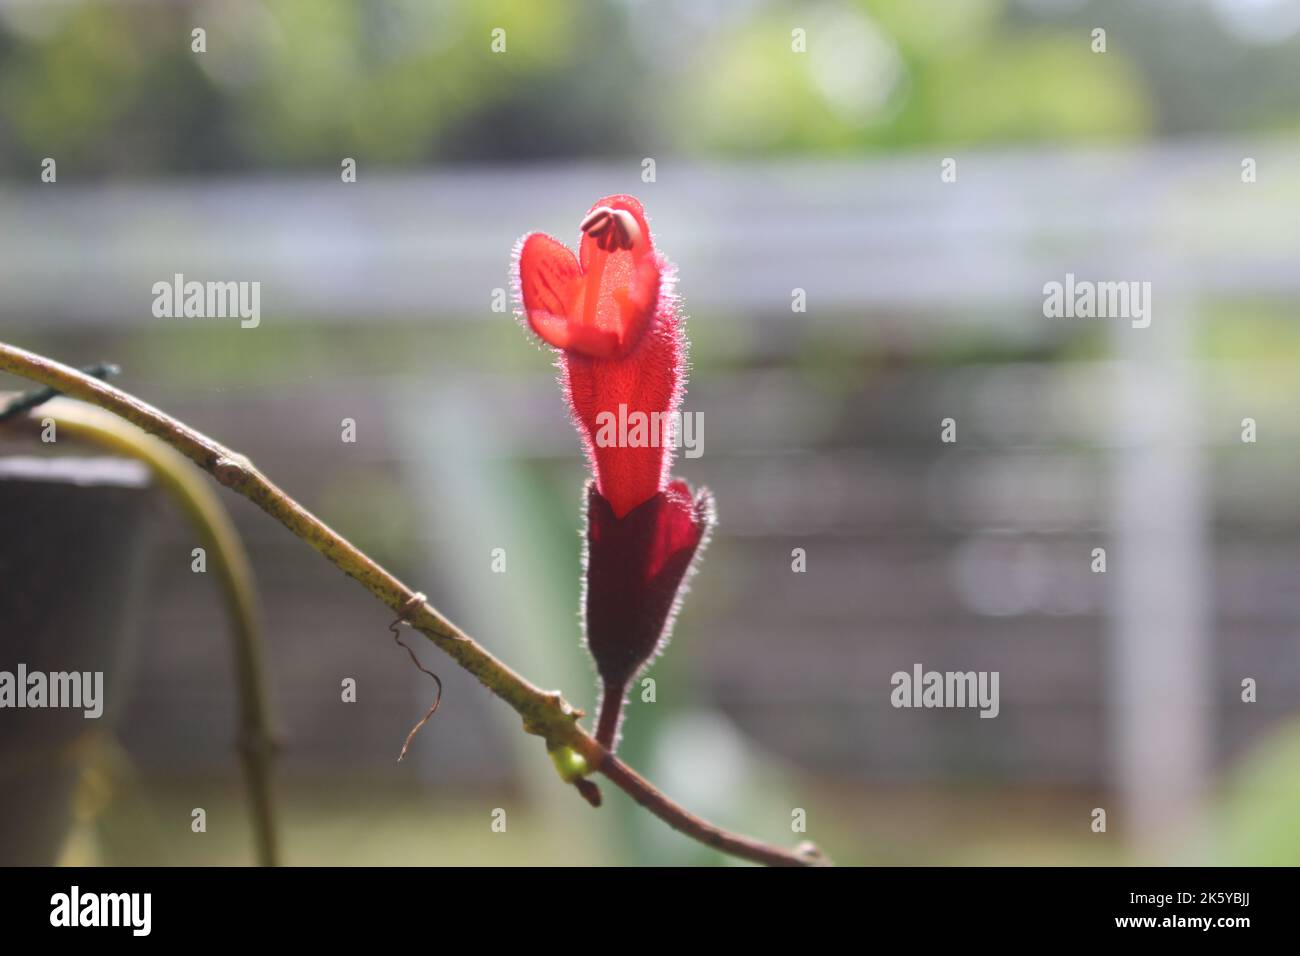 Close-up of beautiful red aeschynanthus flowers on blurred background. Latin name is Aeschynanthus poulcher. Aeschynanthus lipstick houseplant at home Stock Photo